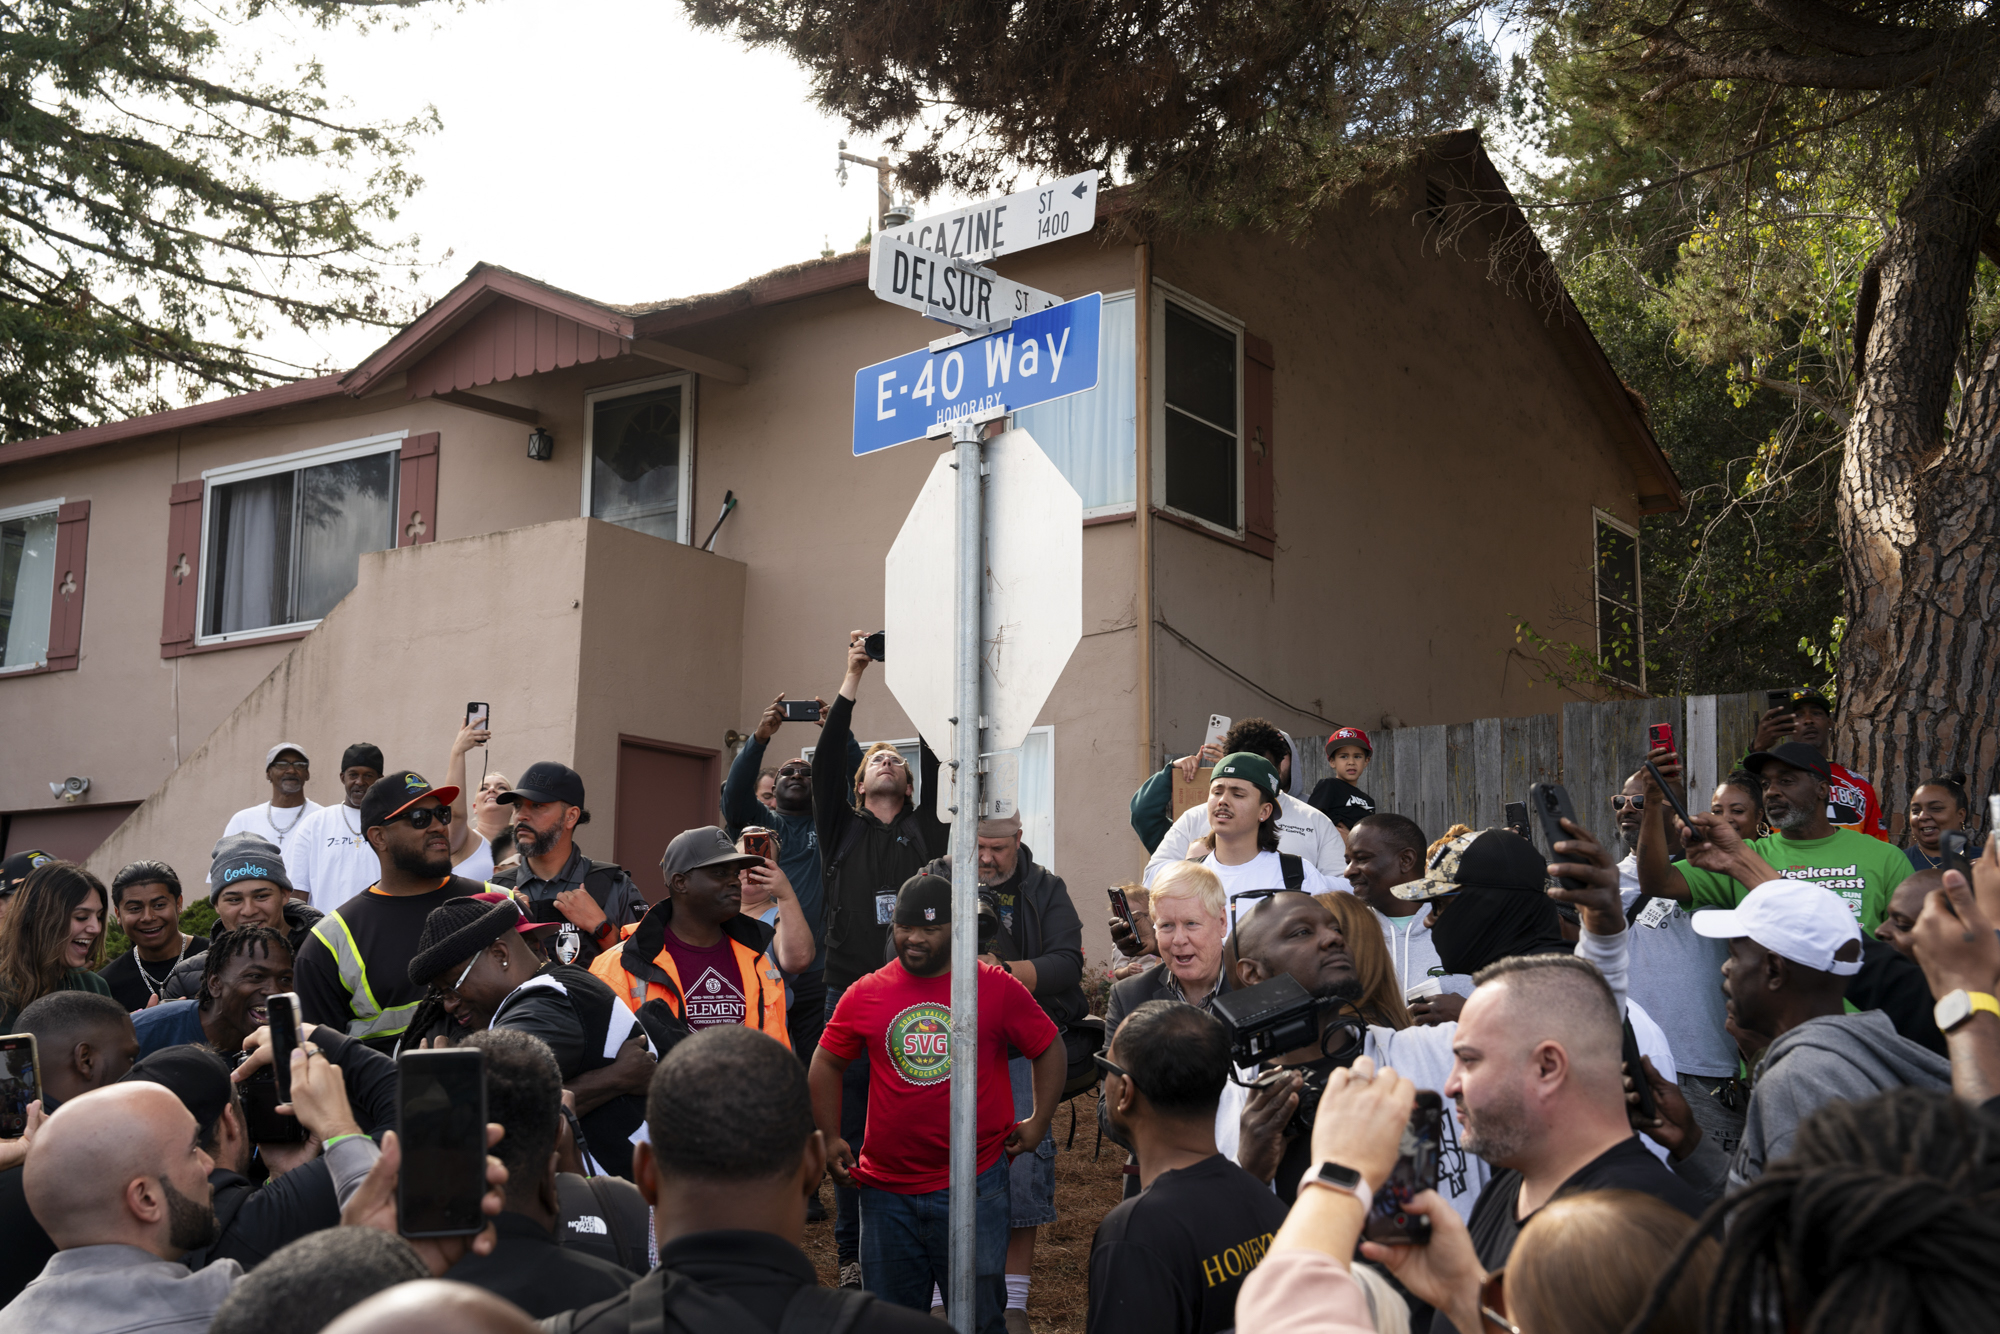 Earl “E-40” Stevens unveils the sign of the renamed Magazine St, aka E-40 Way, during the honorary ceremony on Oct. 21, 2023 in Vallejo, Calif.